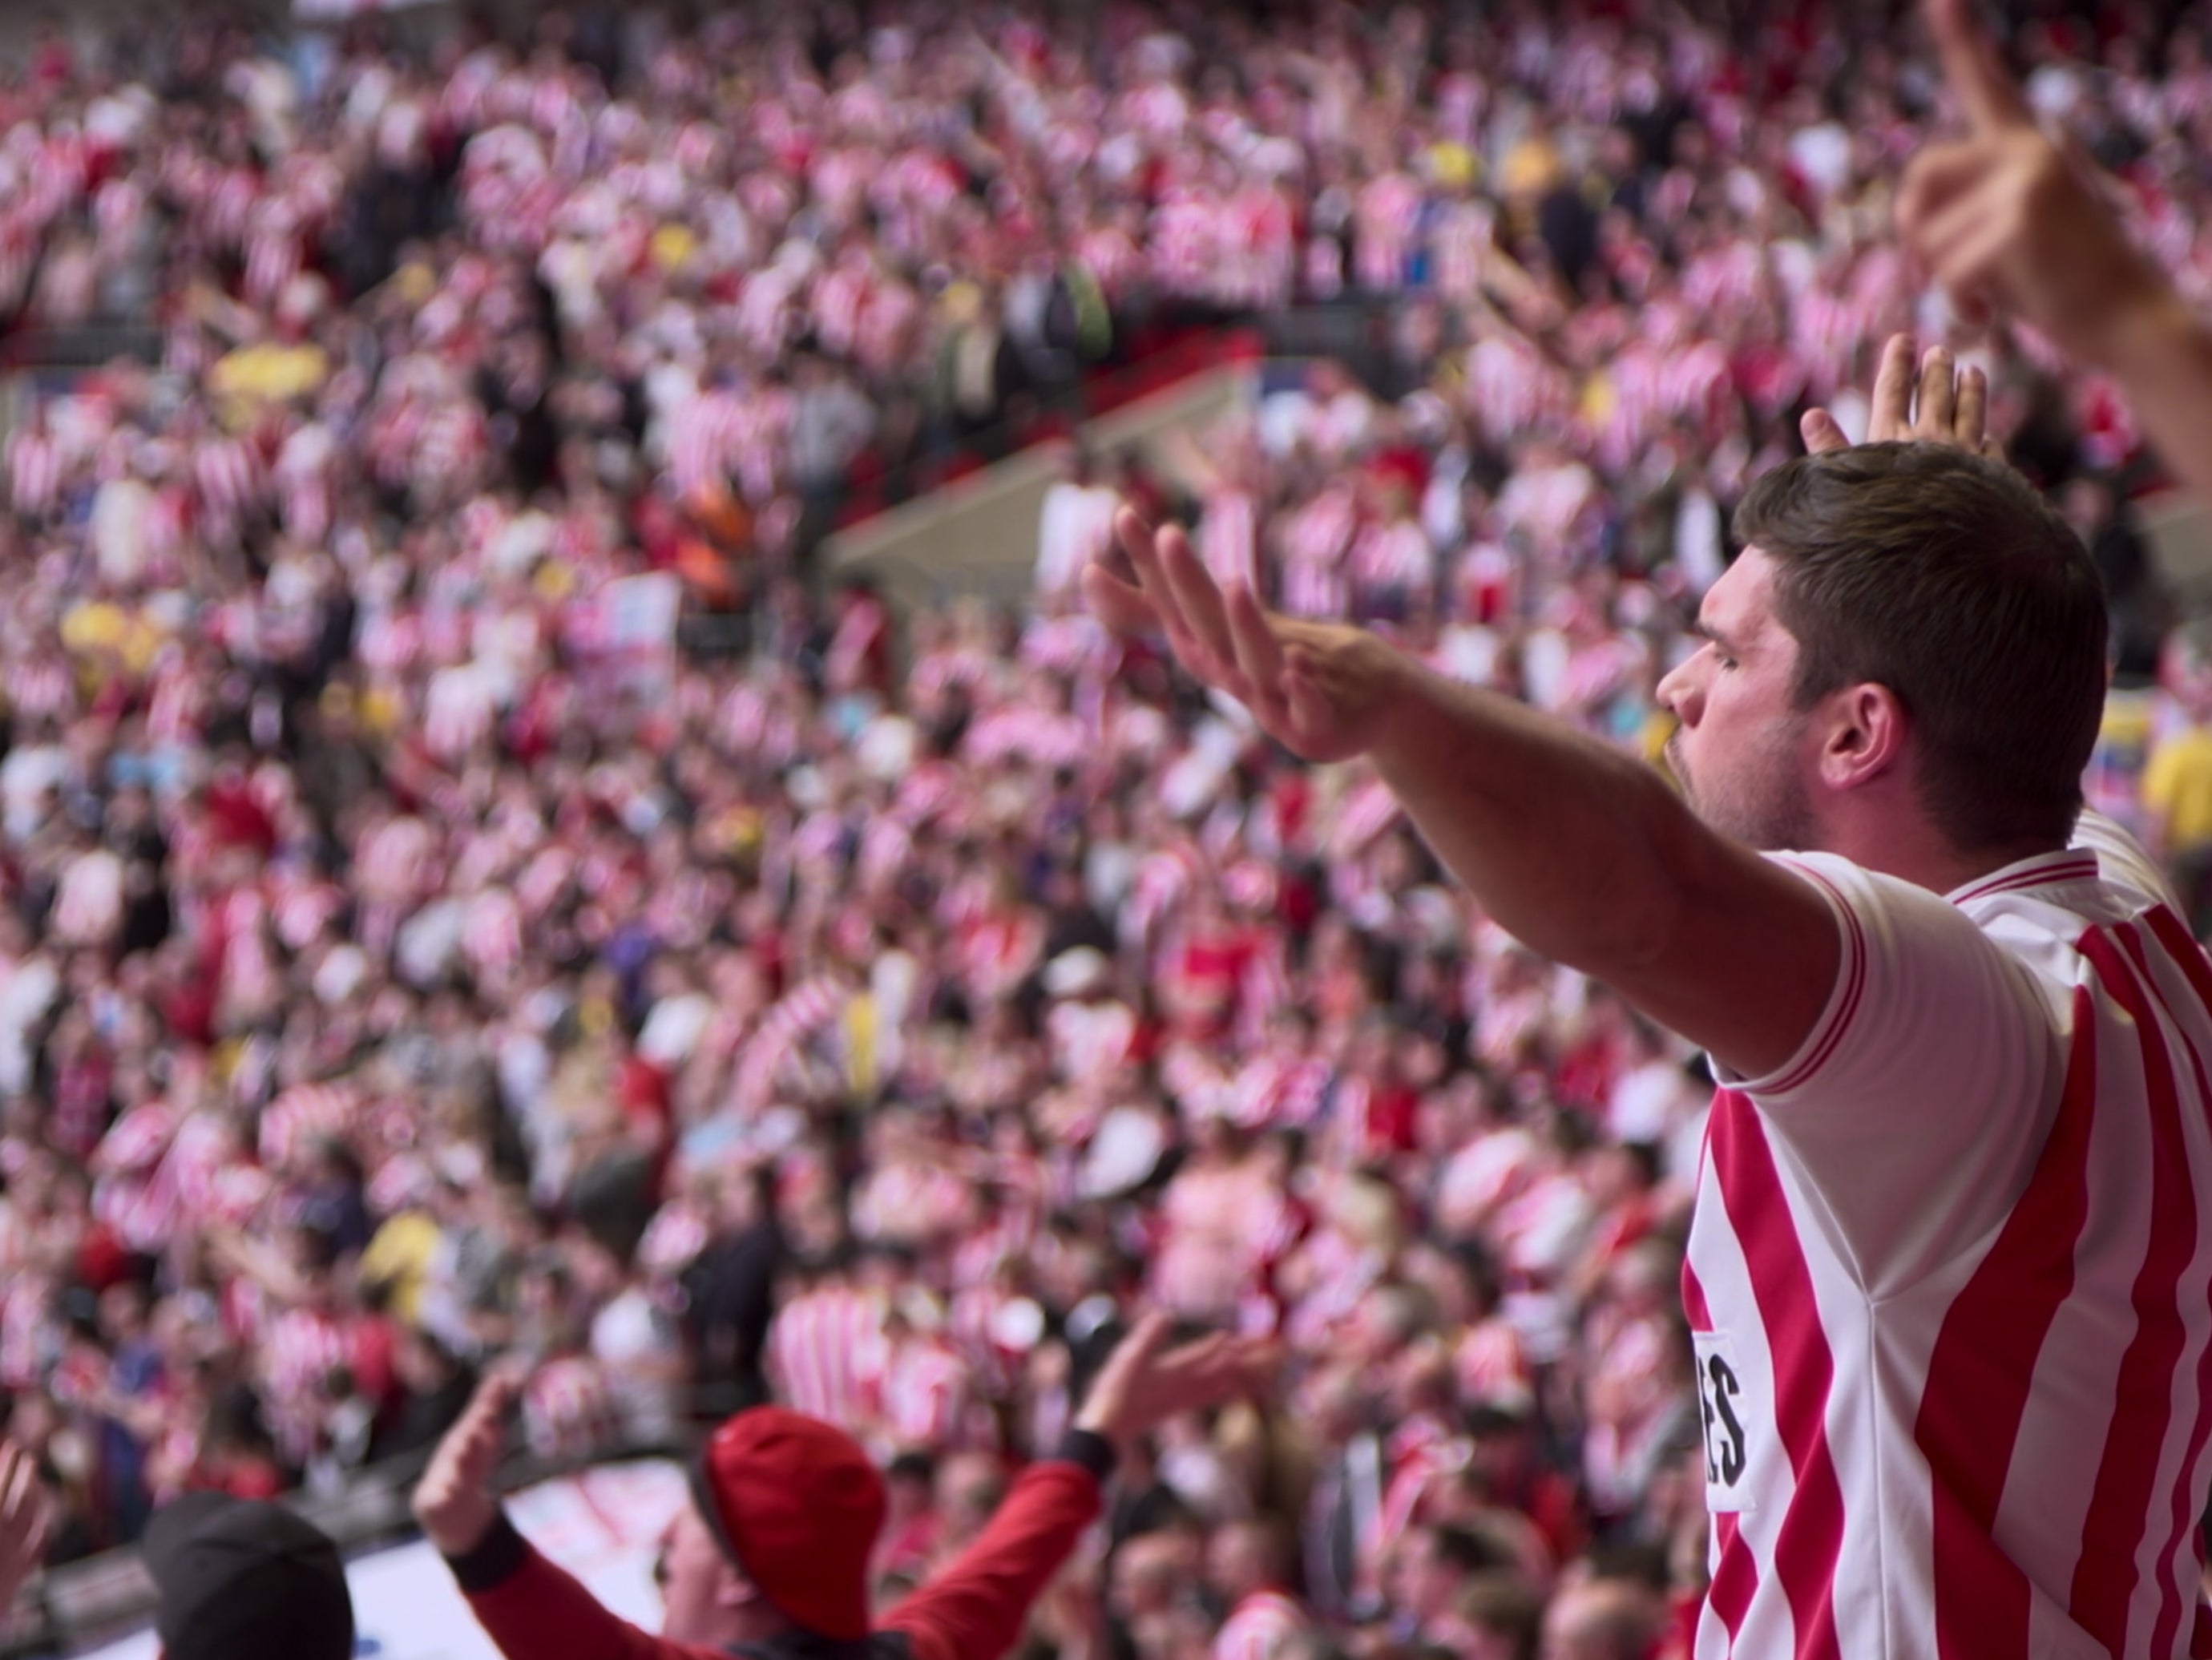 Sunderland return to Wembley in the third and final season of the Netflix show